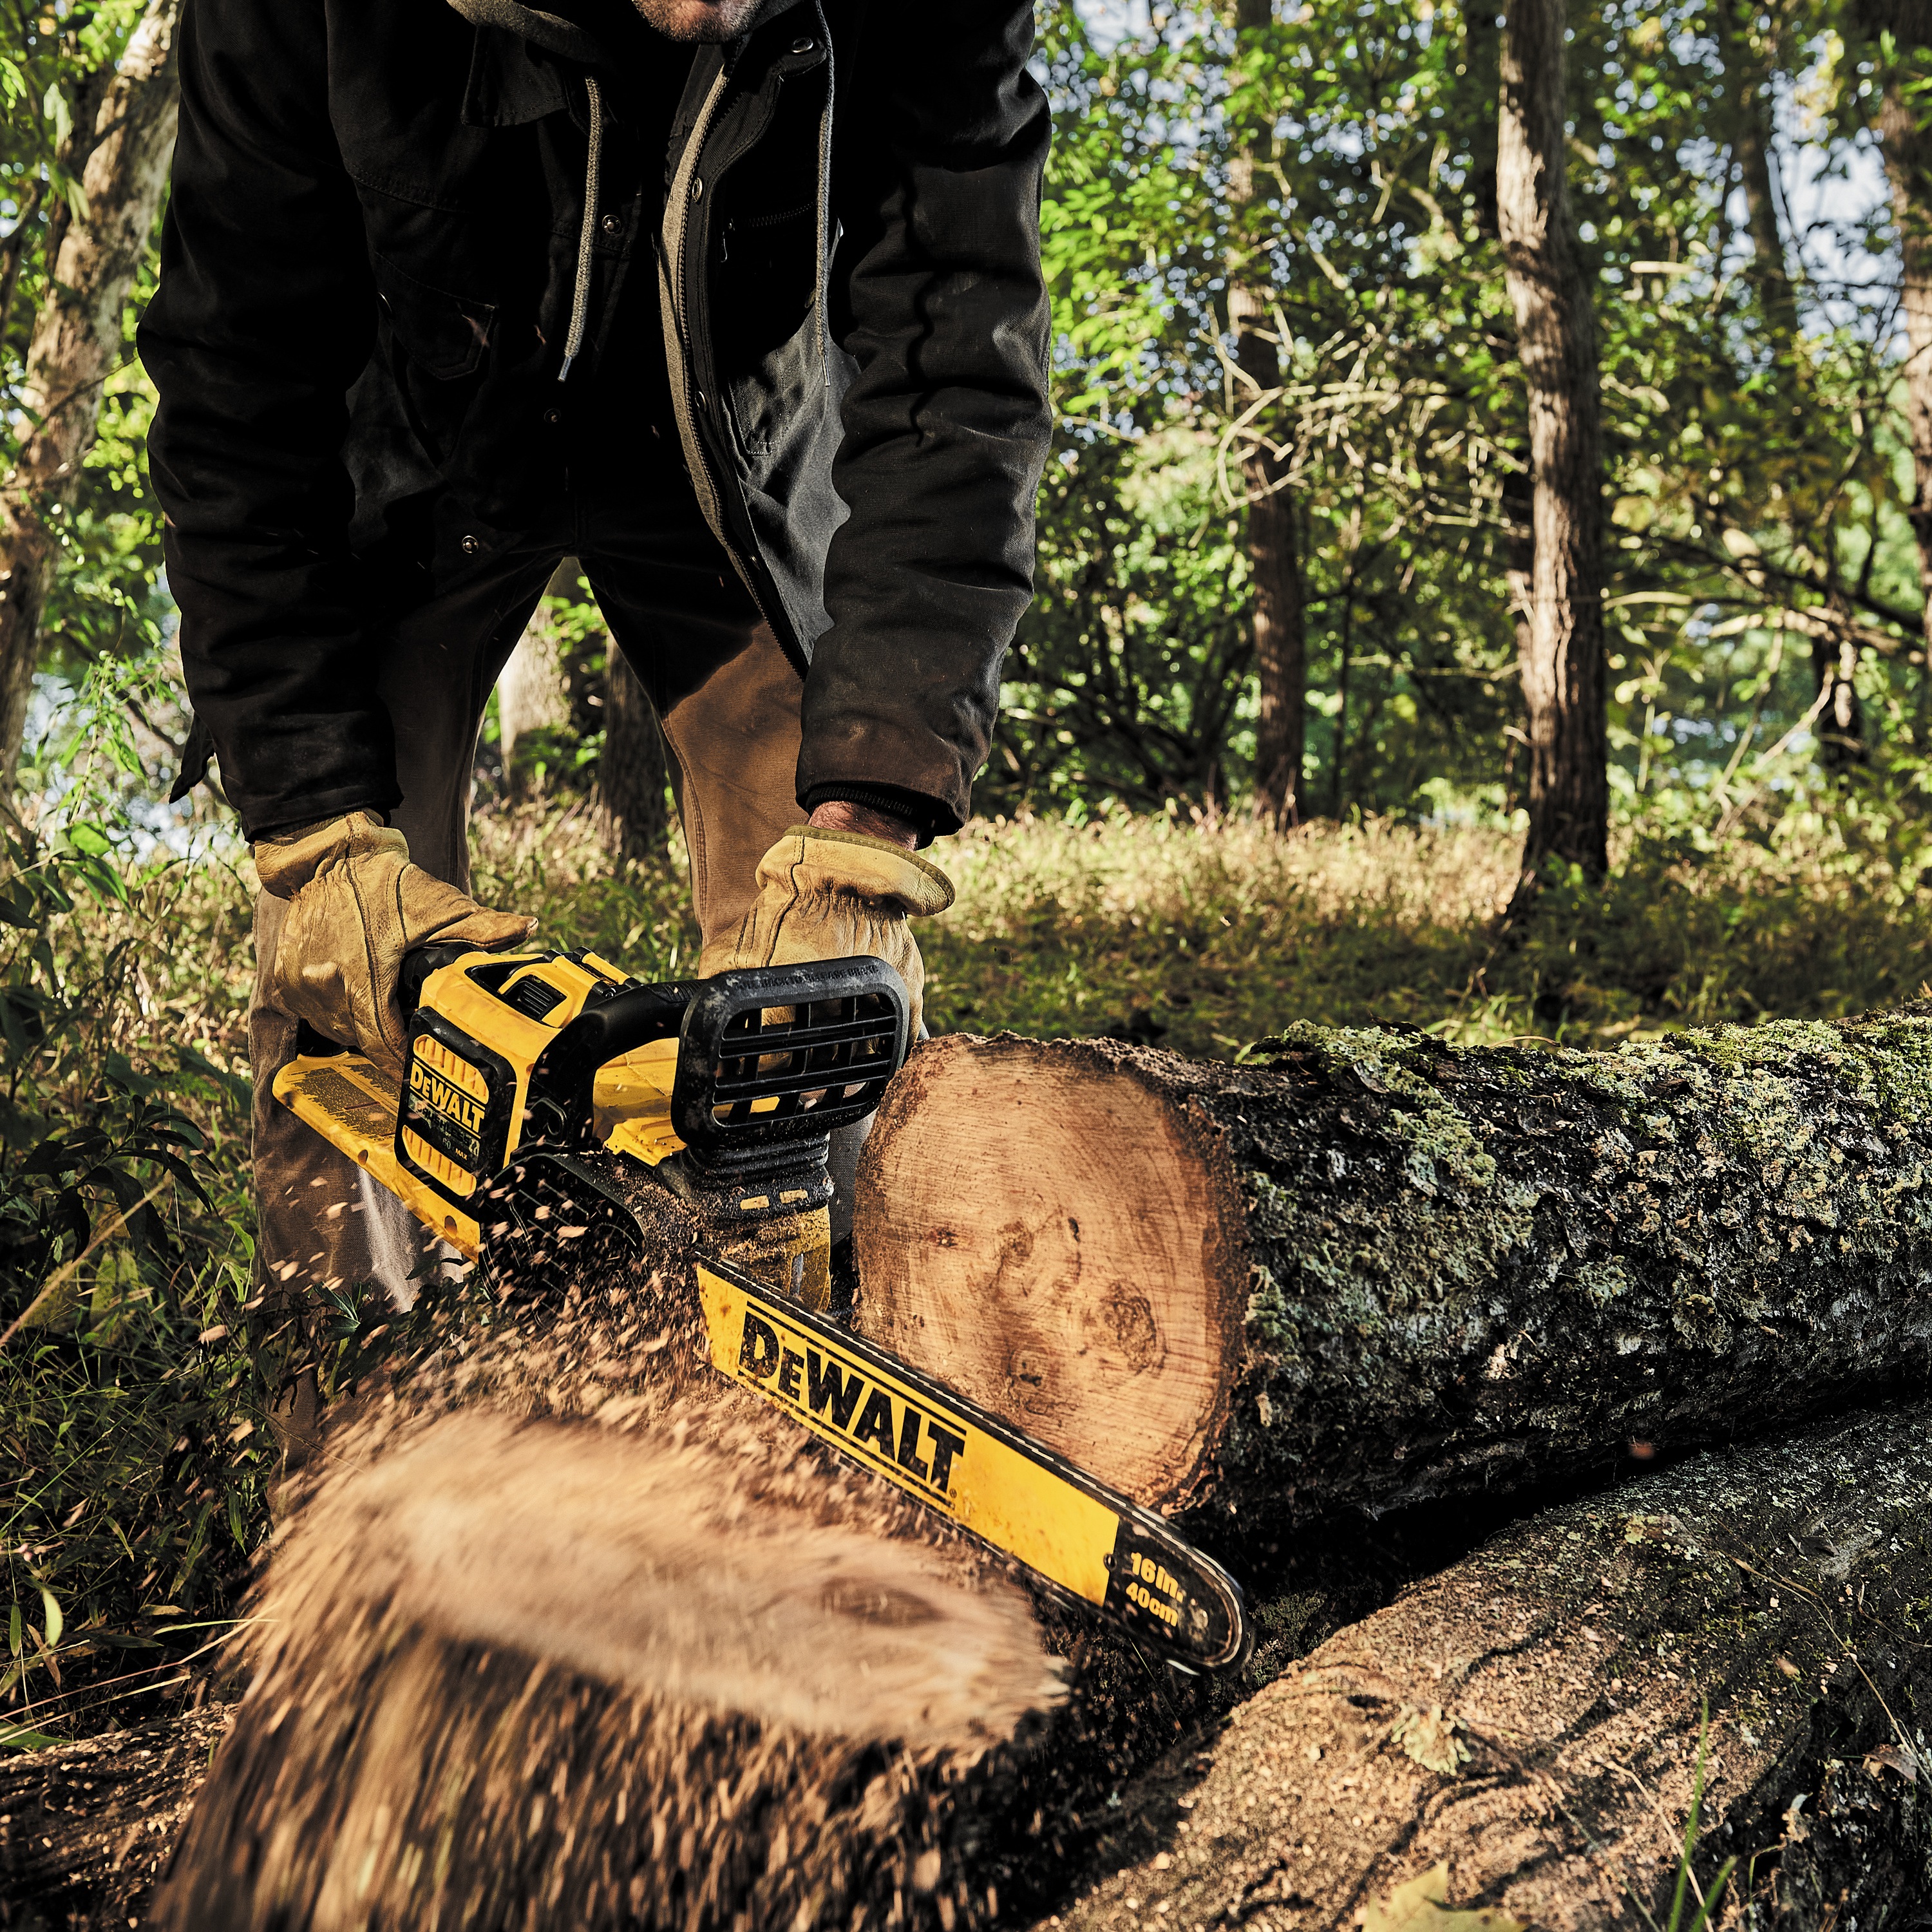 FLEXVOLT Cordless Chainsaw being used by a worker to cut a thick wood log in a forest